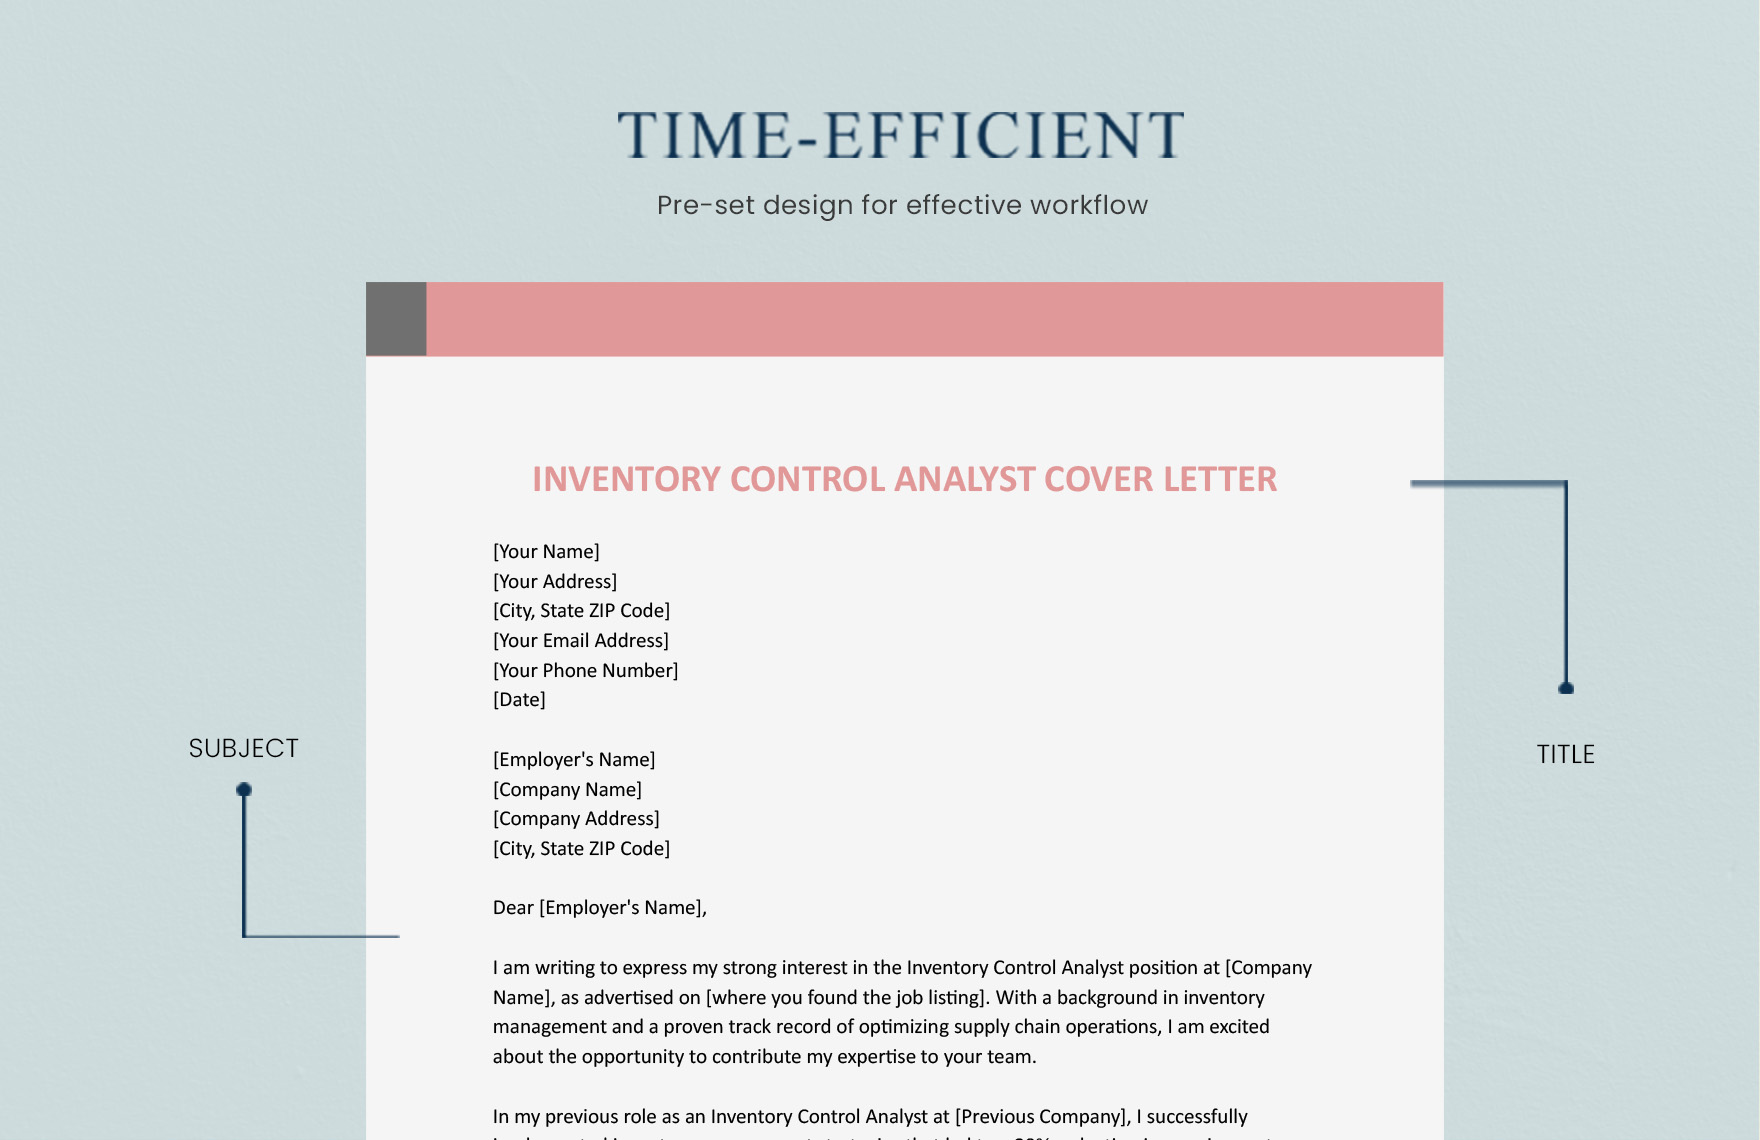 Inventory Control Analyst Cover Letter